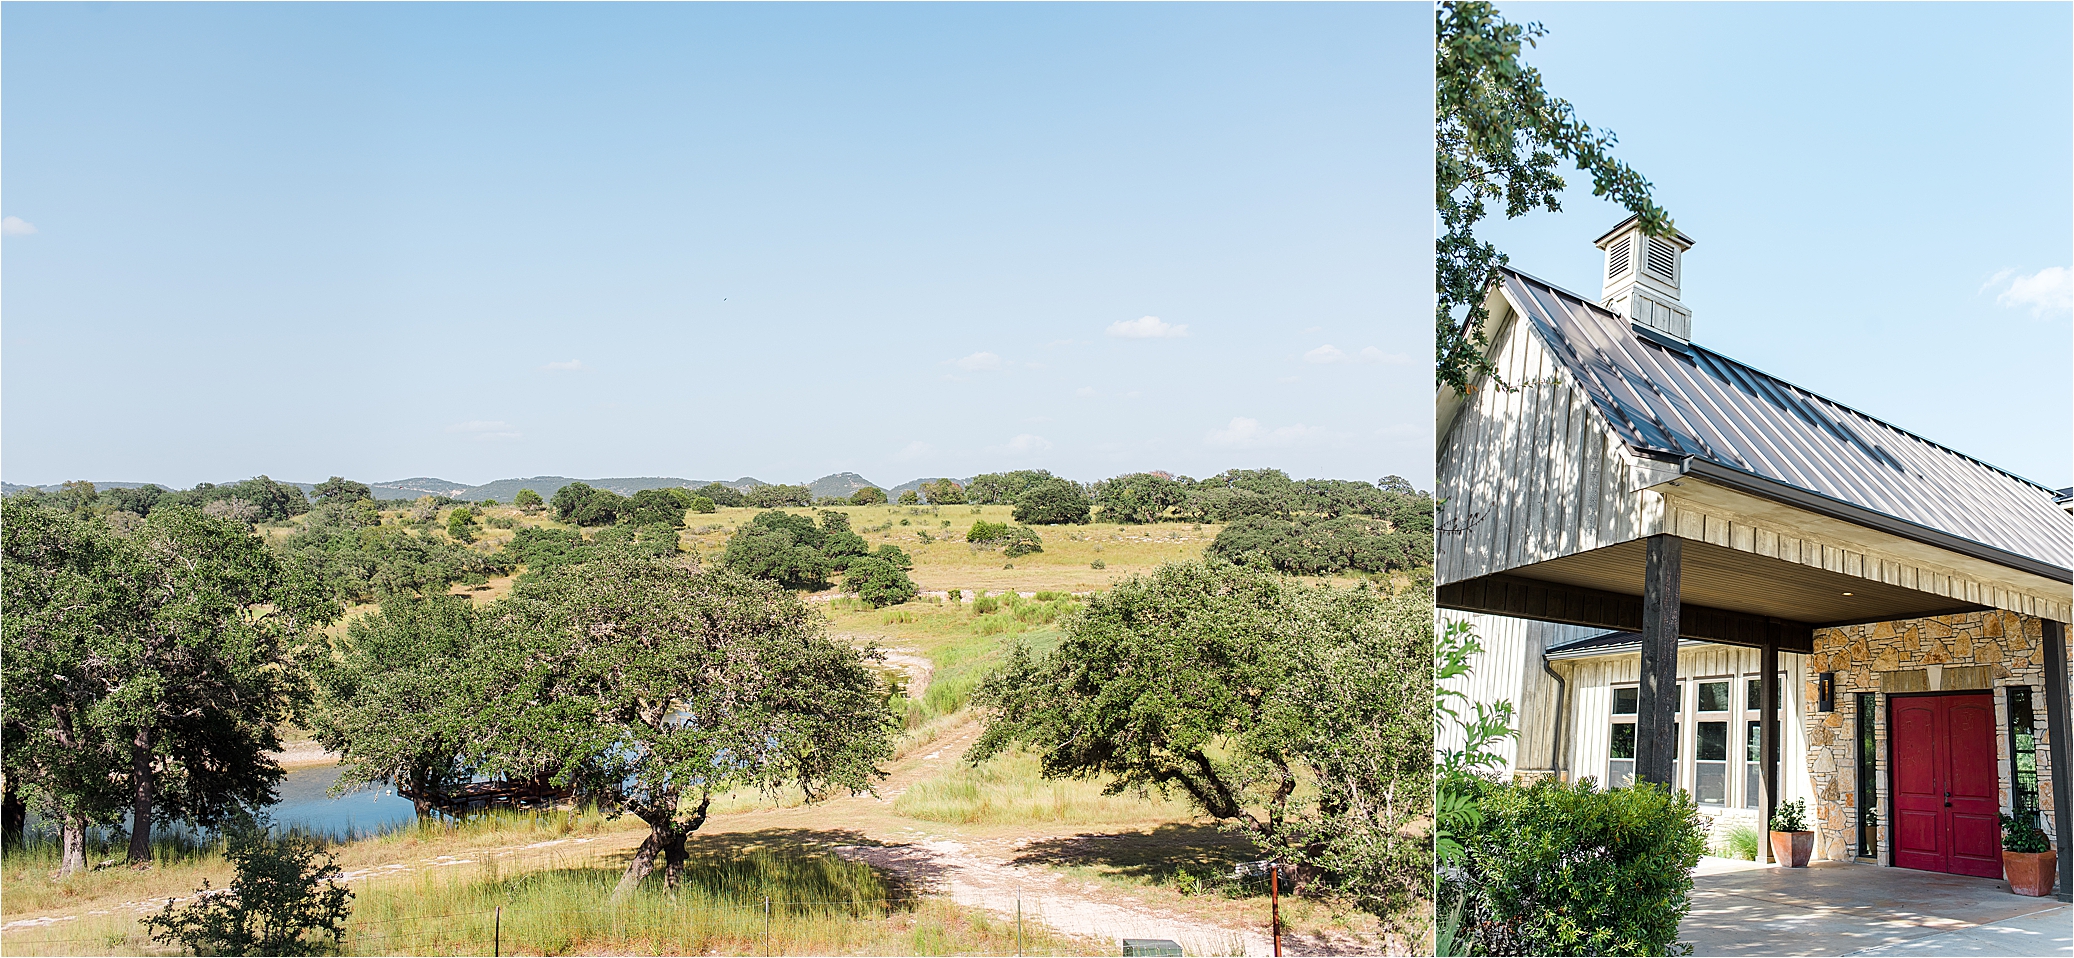 Texas Hill Country Views at Paniolo Ranch in Boerne, Texas